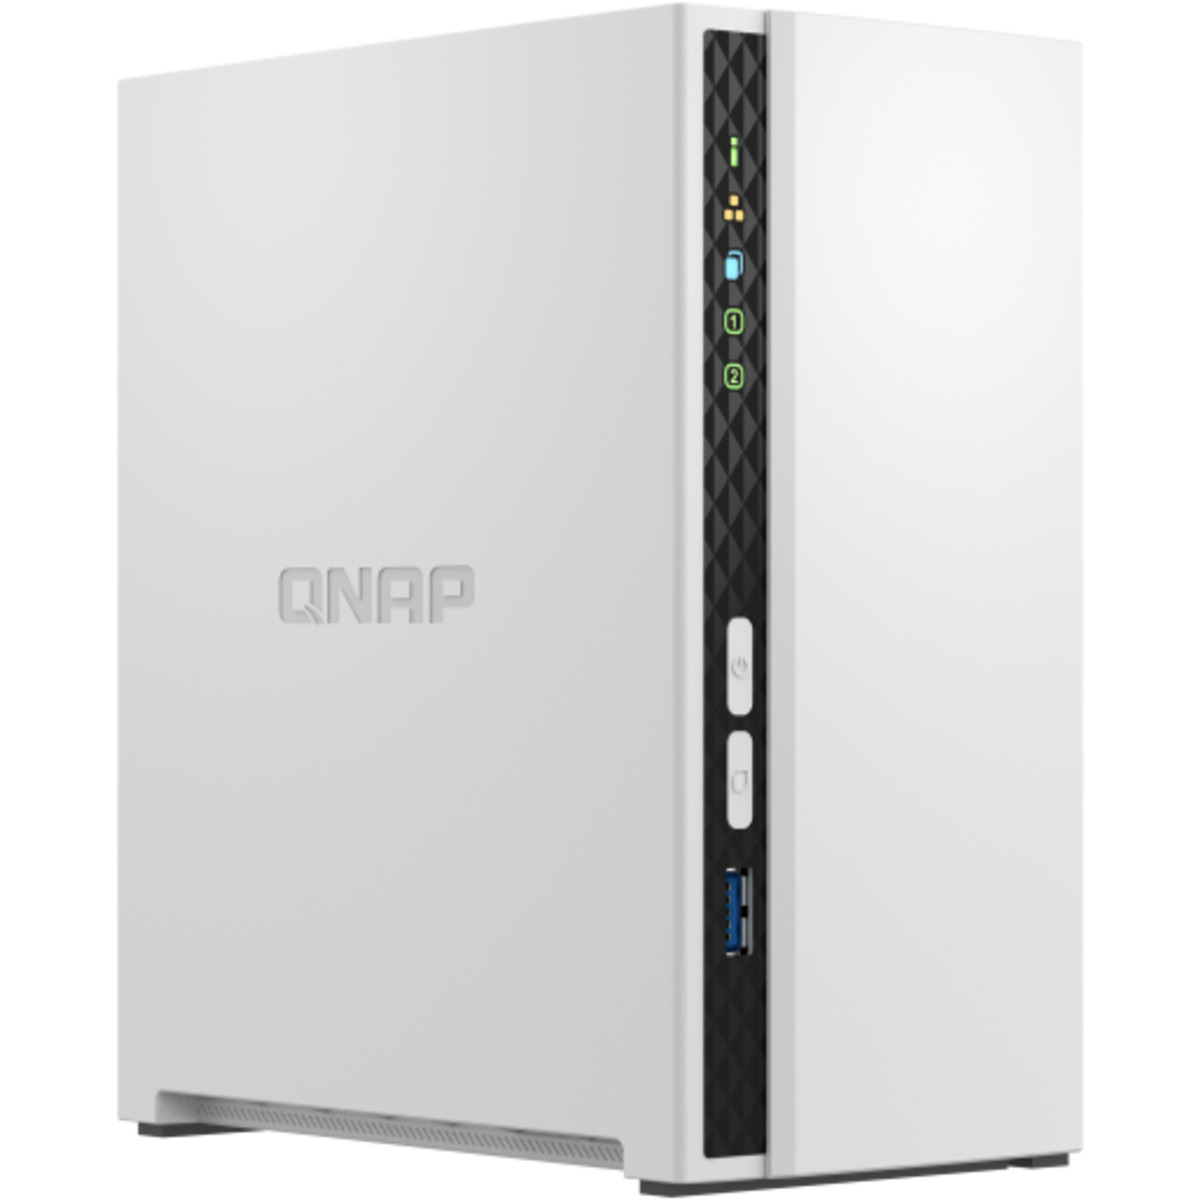 buy QNAP TS-233 4tb Desktop NAS - Network Attached Storage Device 2x2000gb Seagate IronWolf Pro ST2000NT001 3.5 7200rpm SATA 6Gb/s HDD NAS Class Drives Installed - Burn-In Tested - nas headquarters buy network attached storage server device das new raid-5 free shipping simply usa TS-233